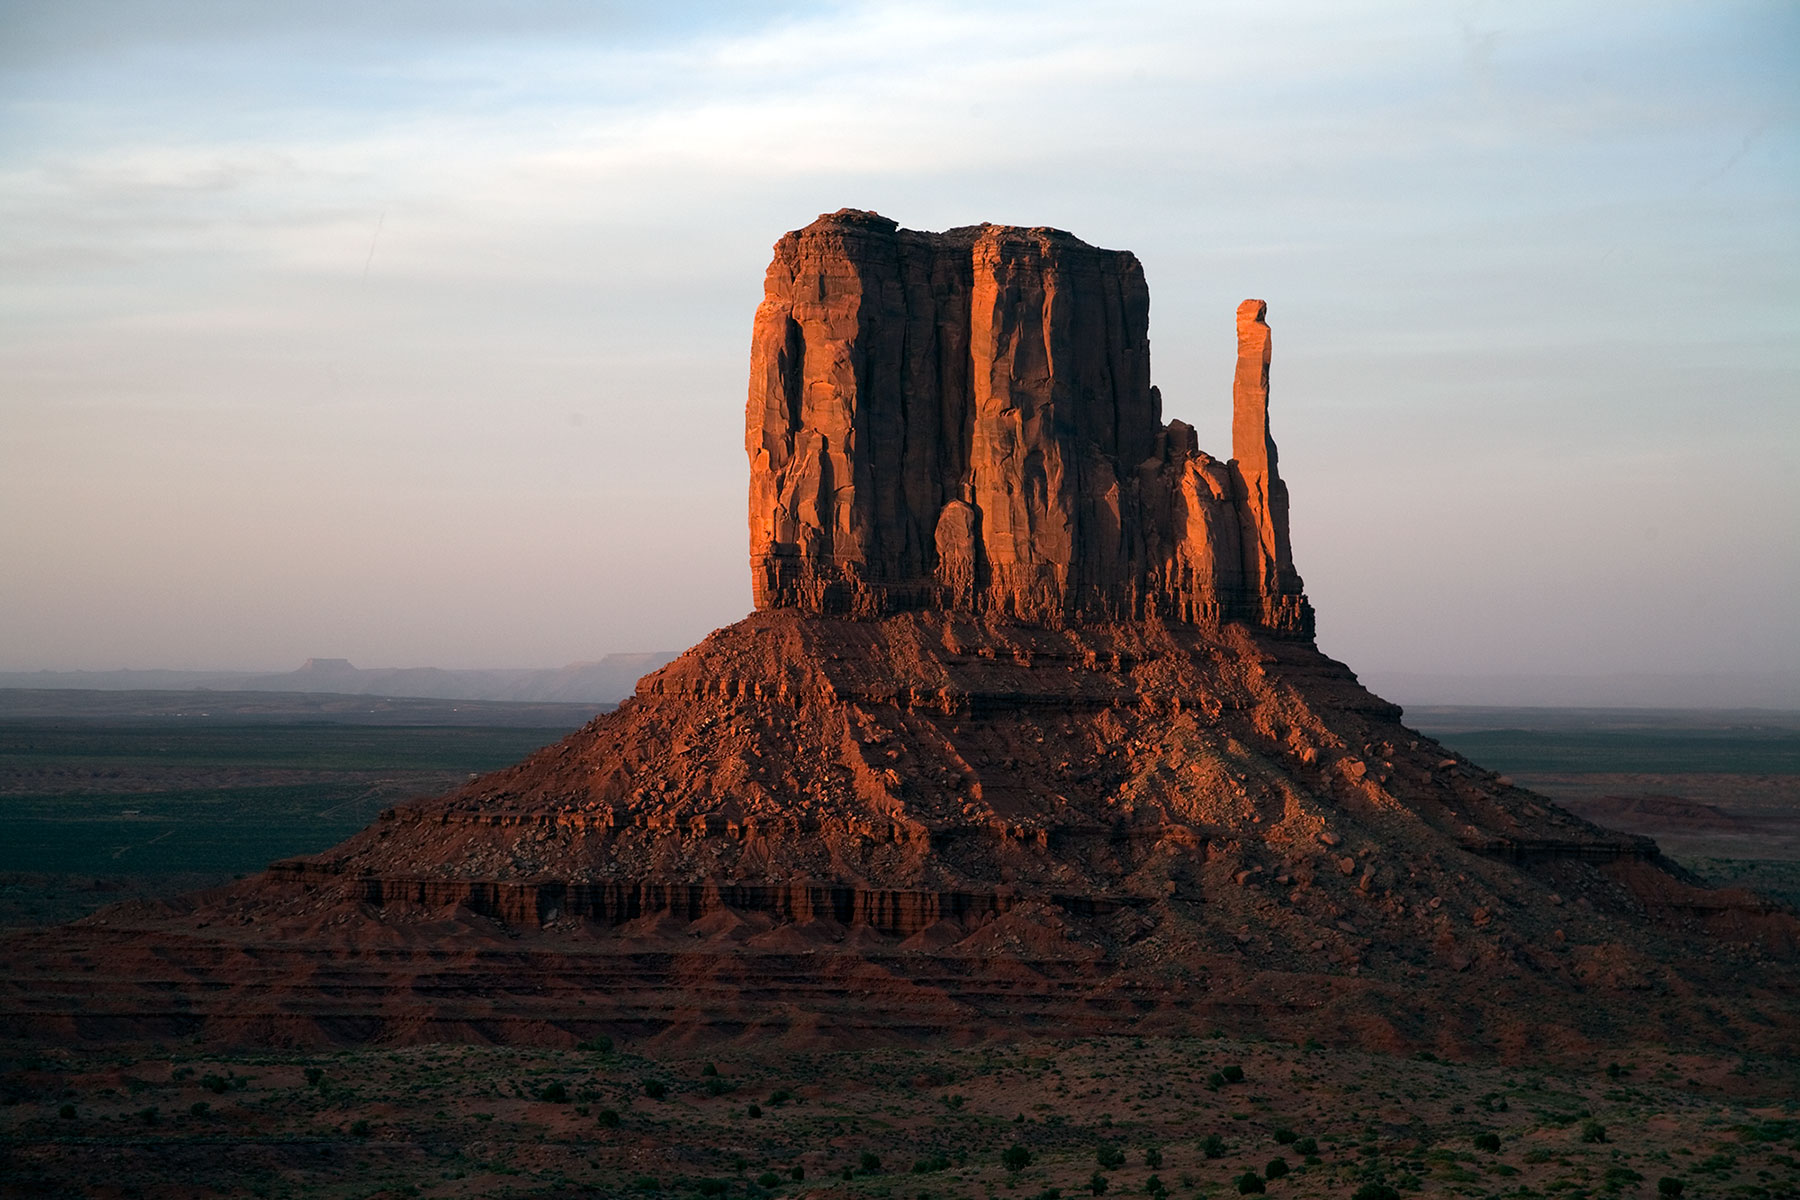 Monument Valley at Dusk